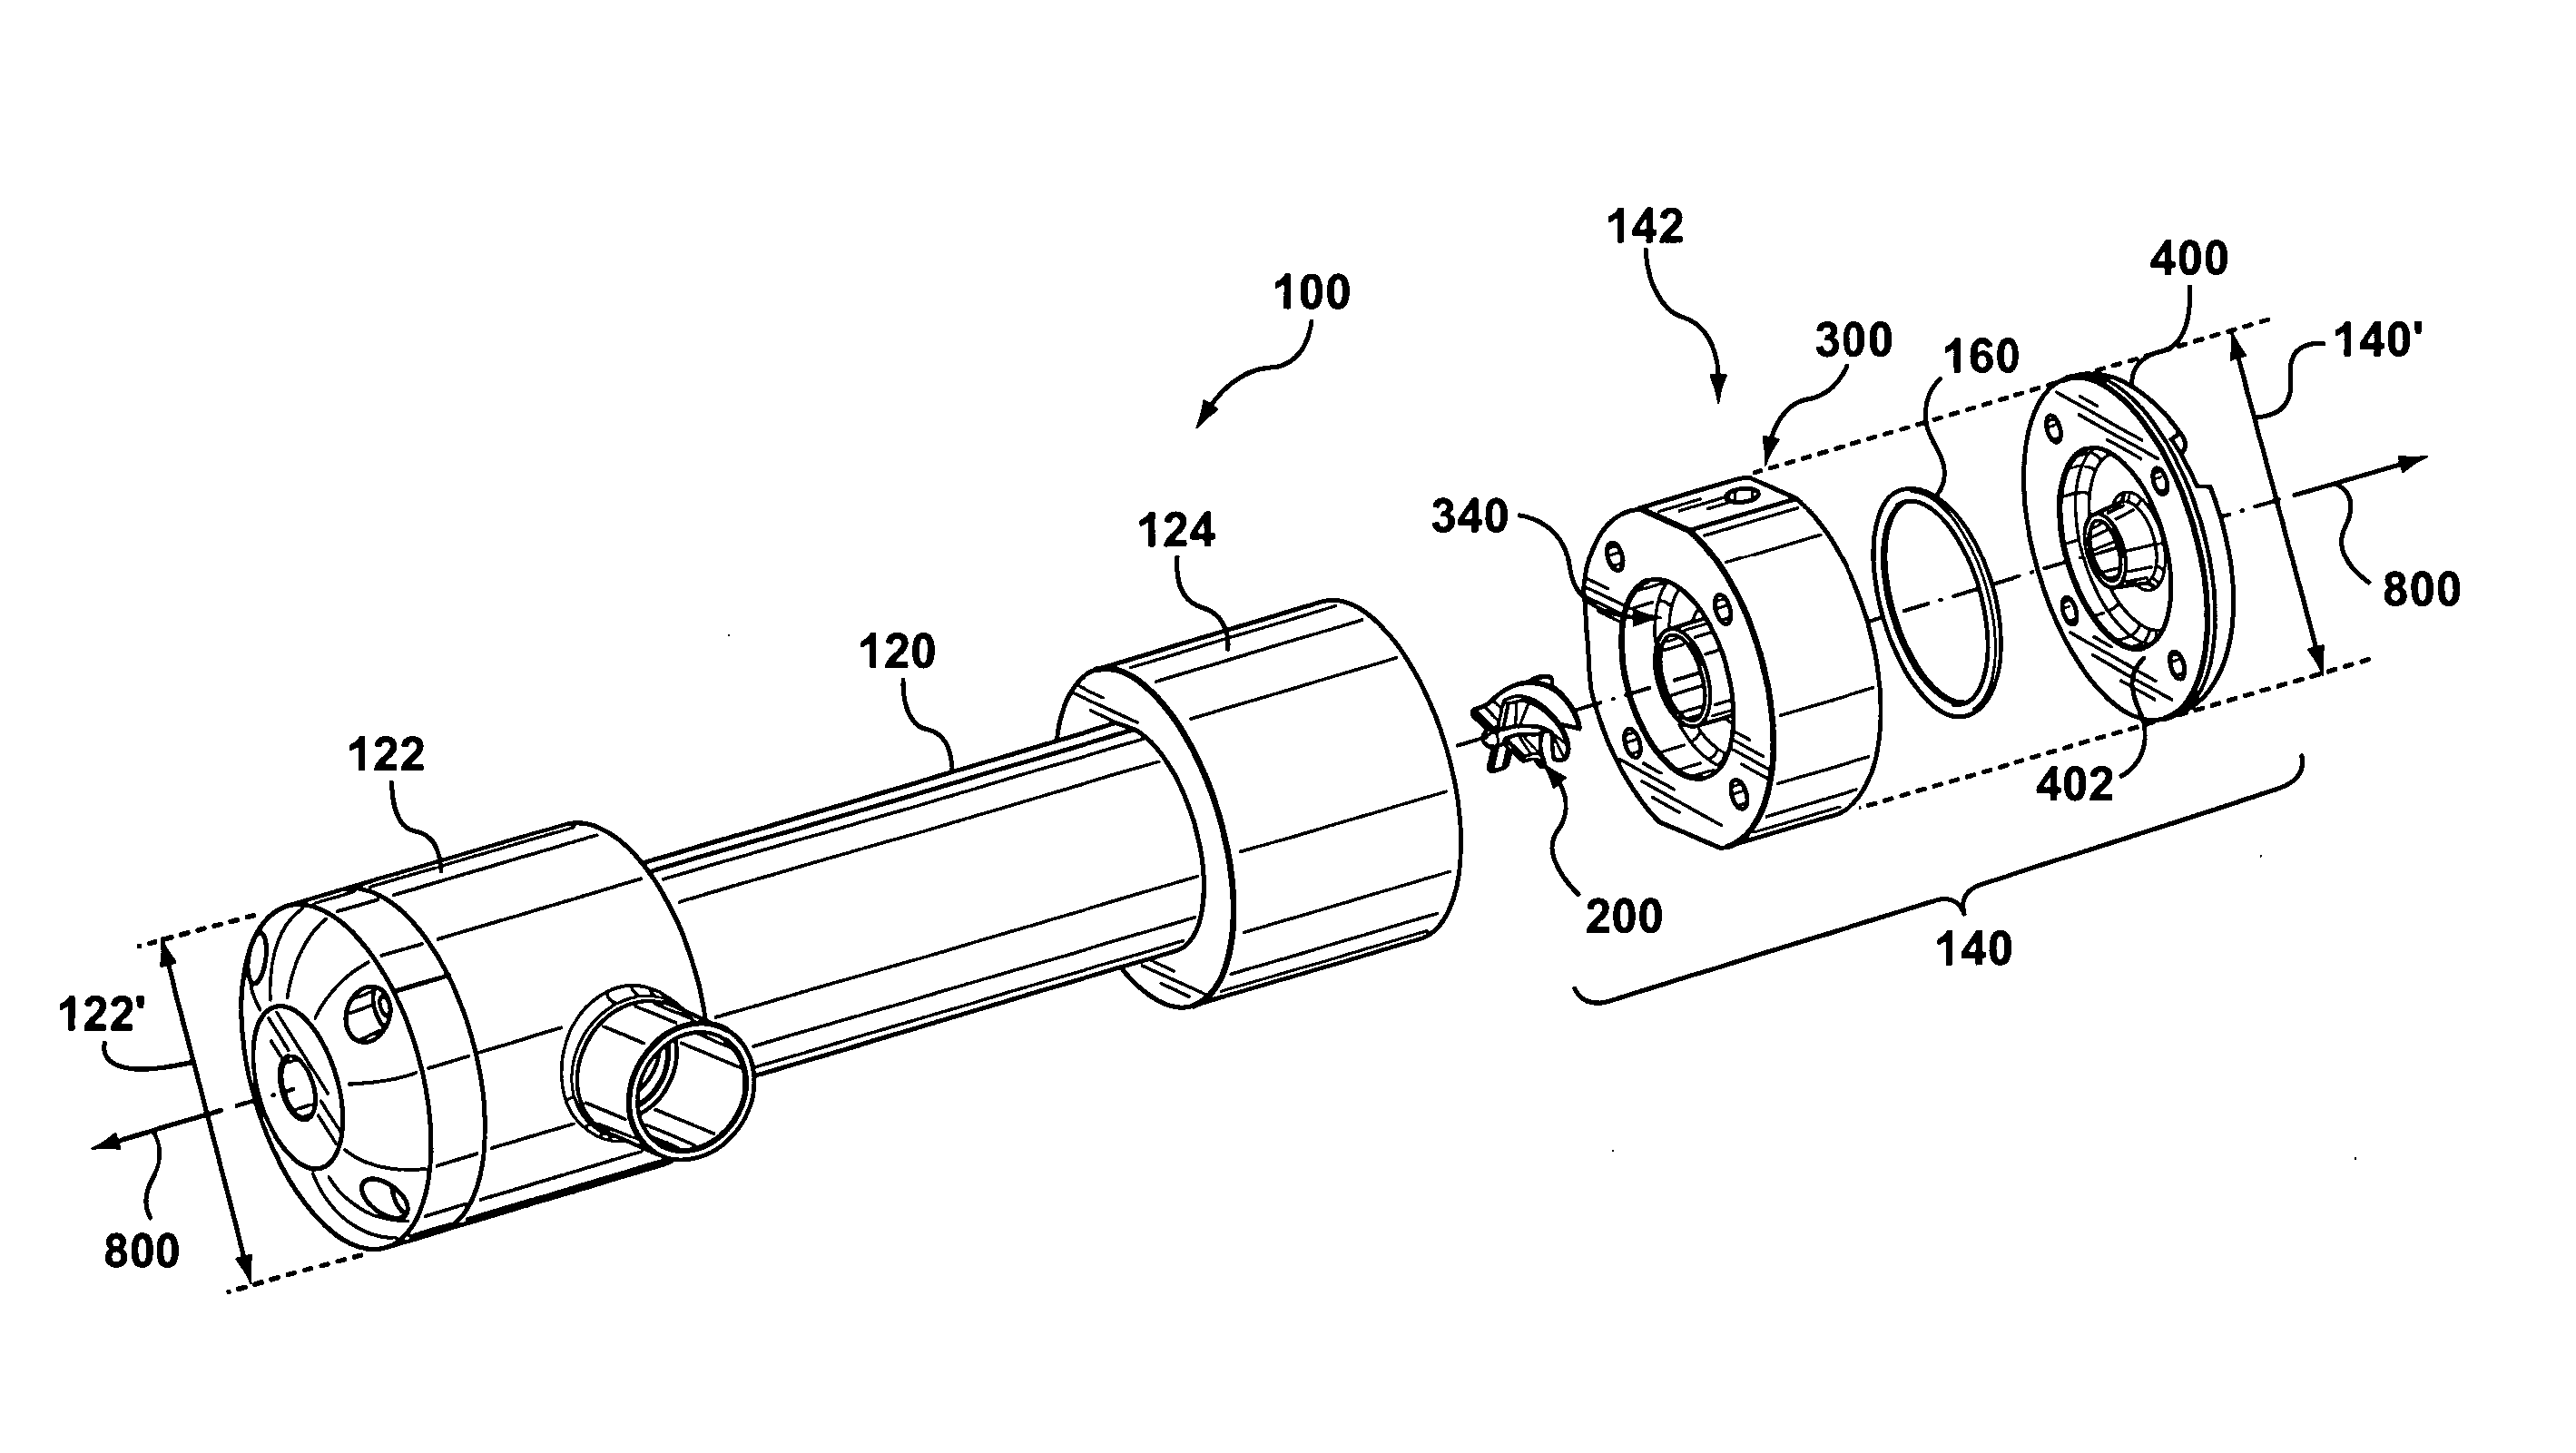 Energy and/or mass exchange apparatus having an integrated fluid separator